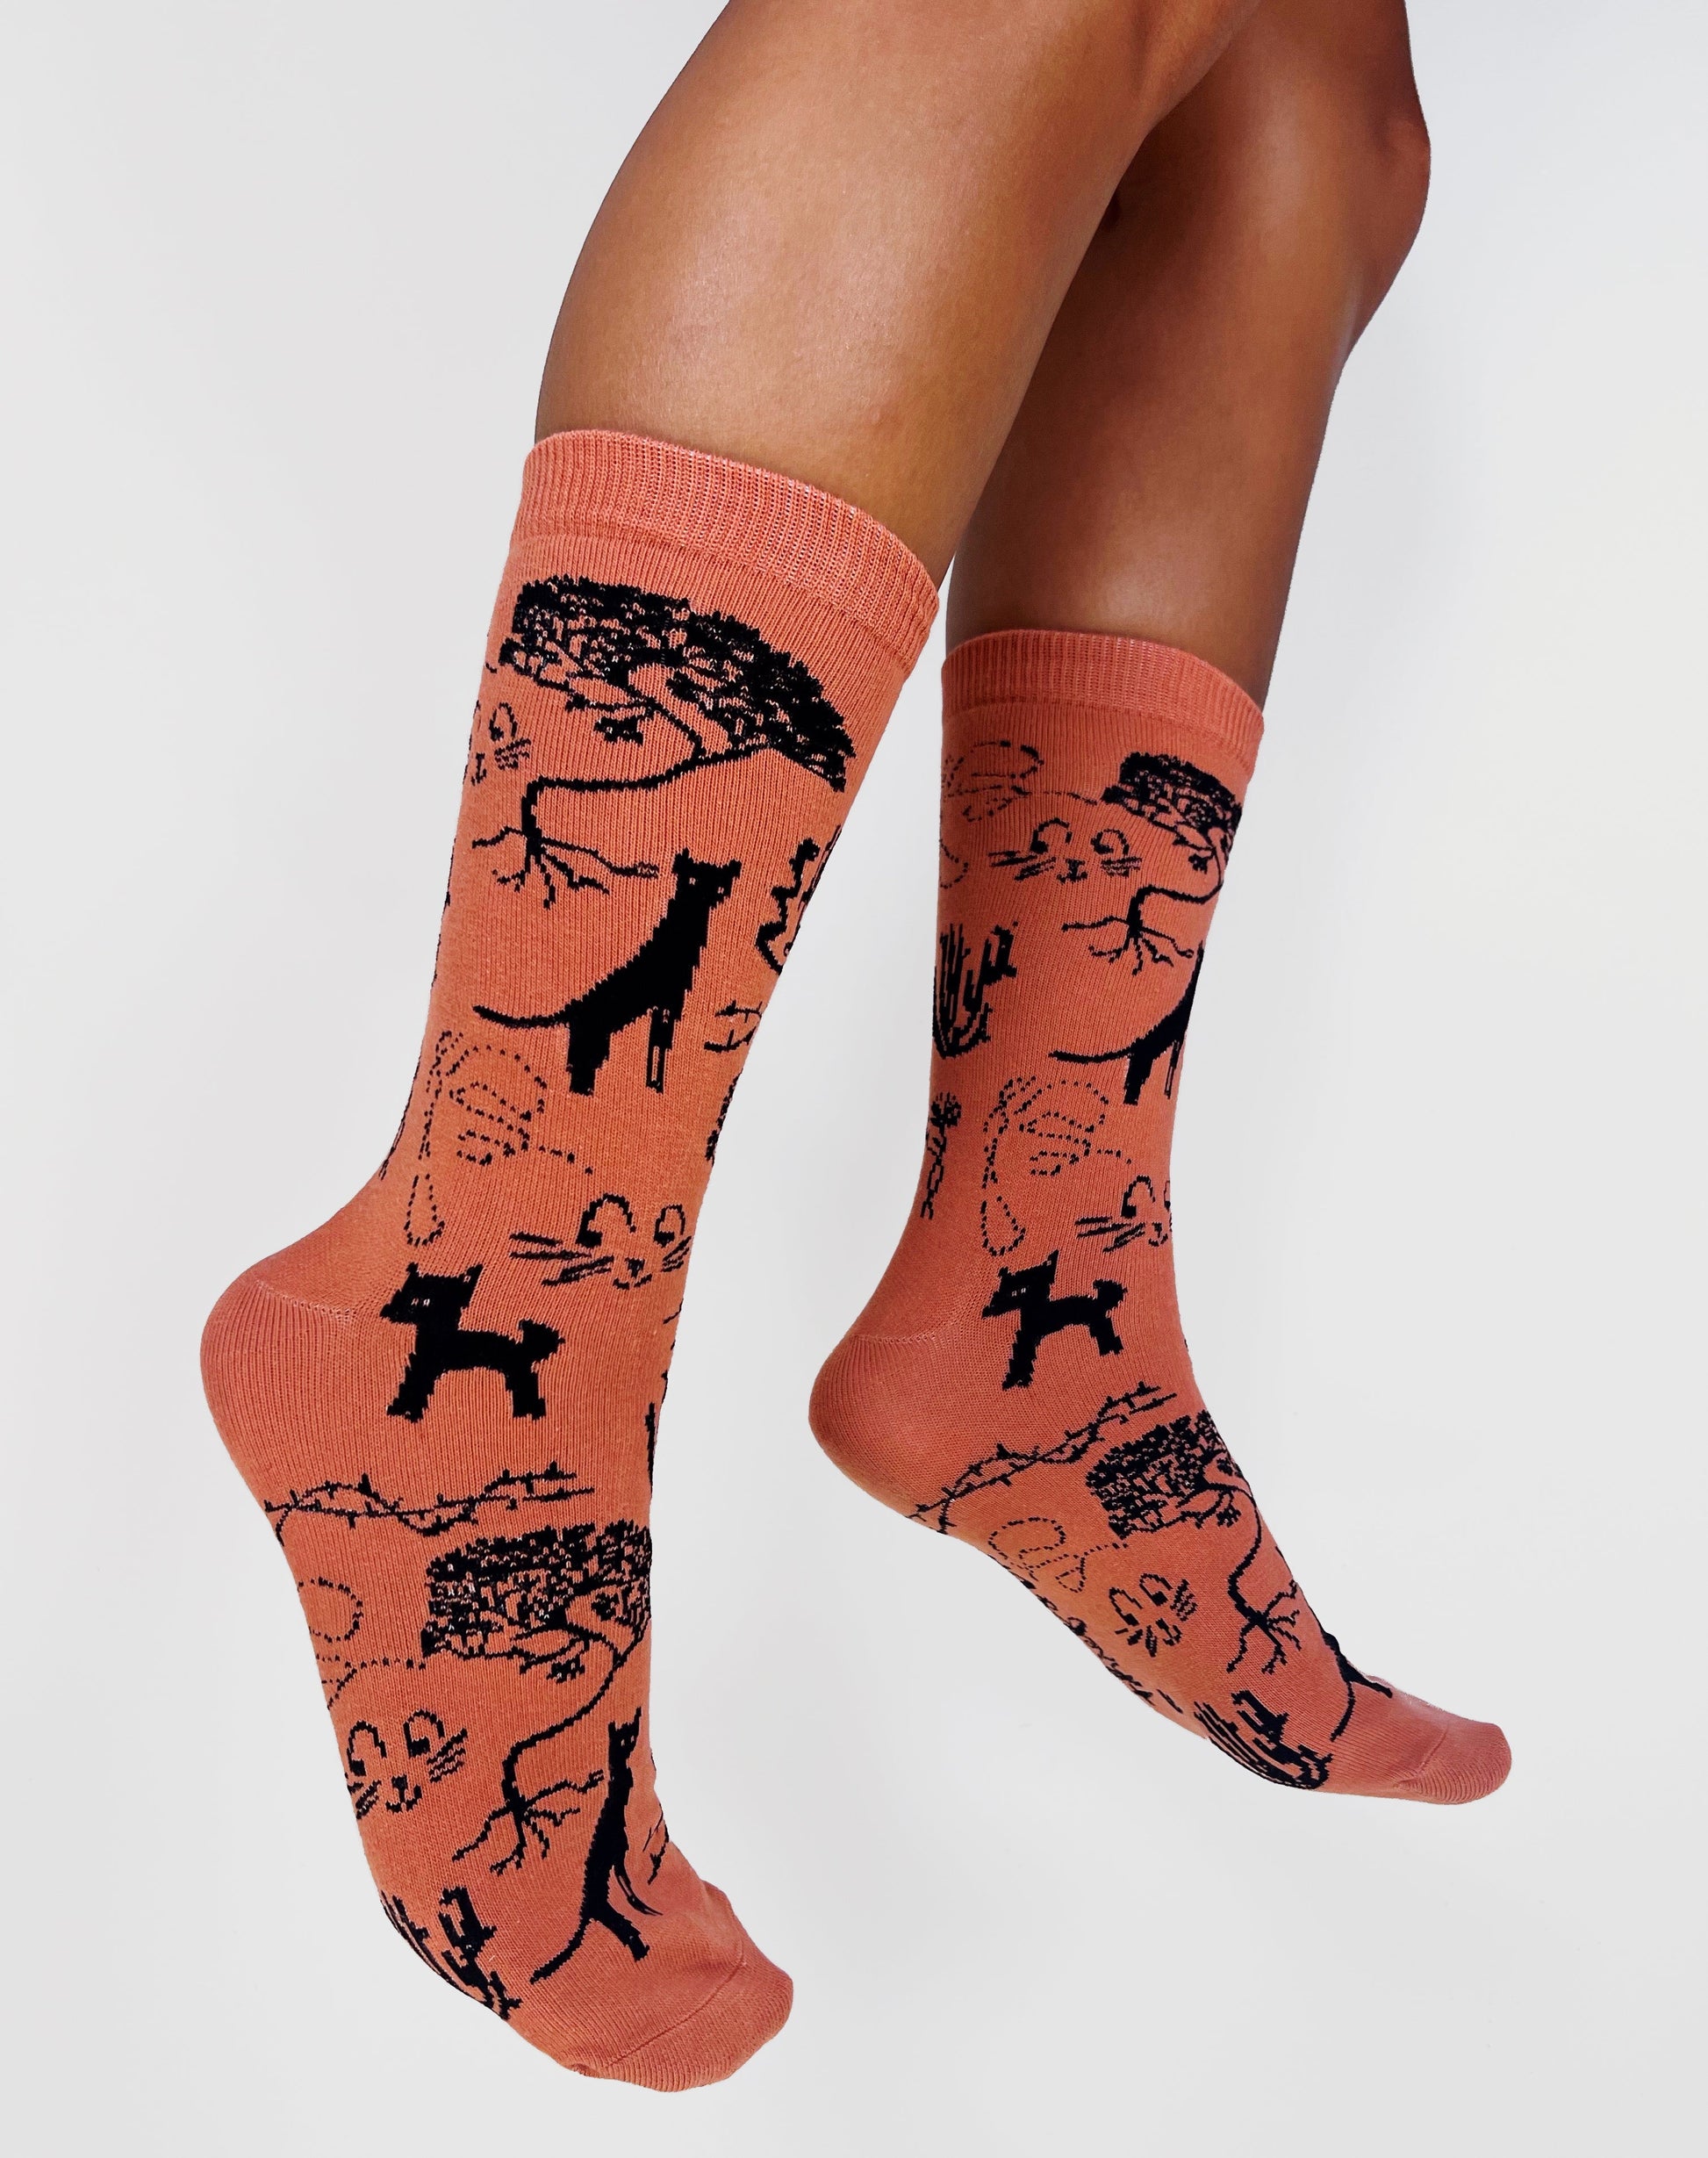 Mulberry Sketchbook Socks - Thief and Bandit